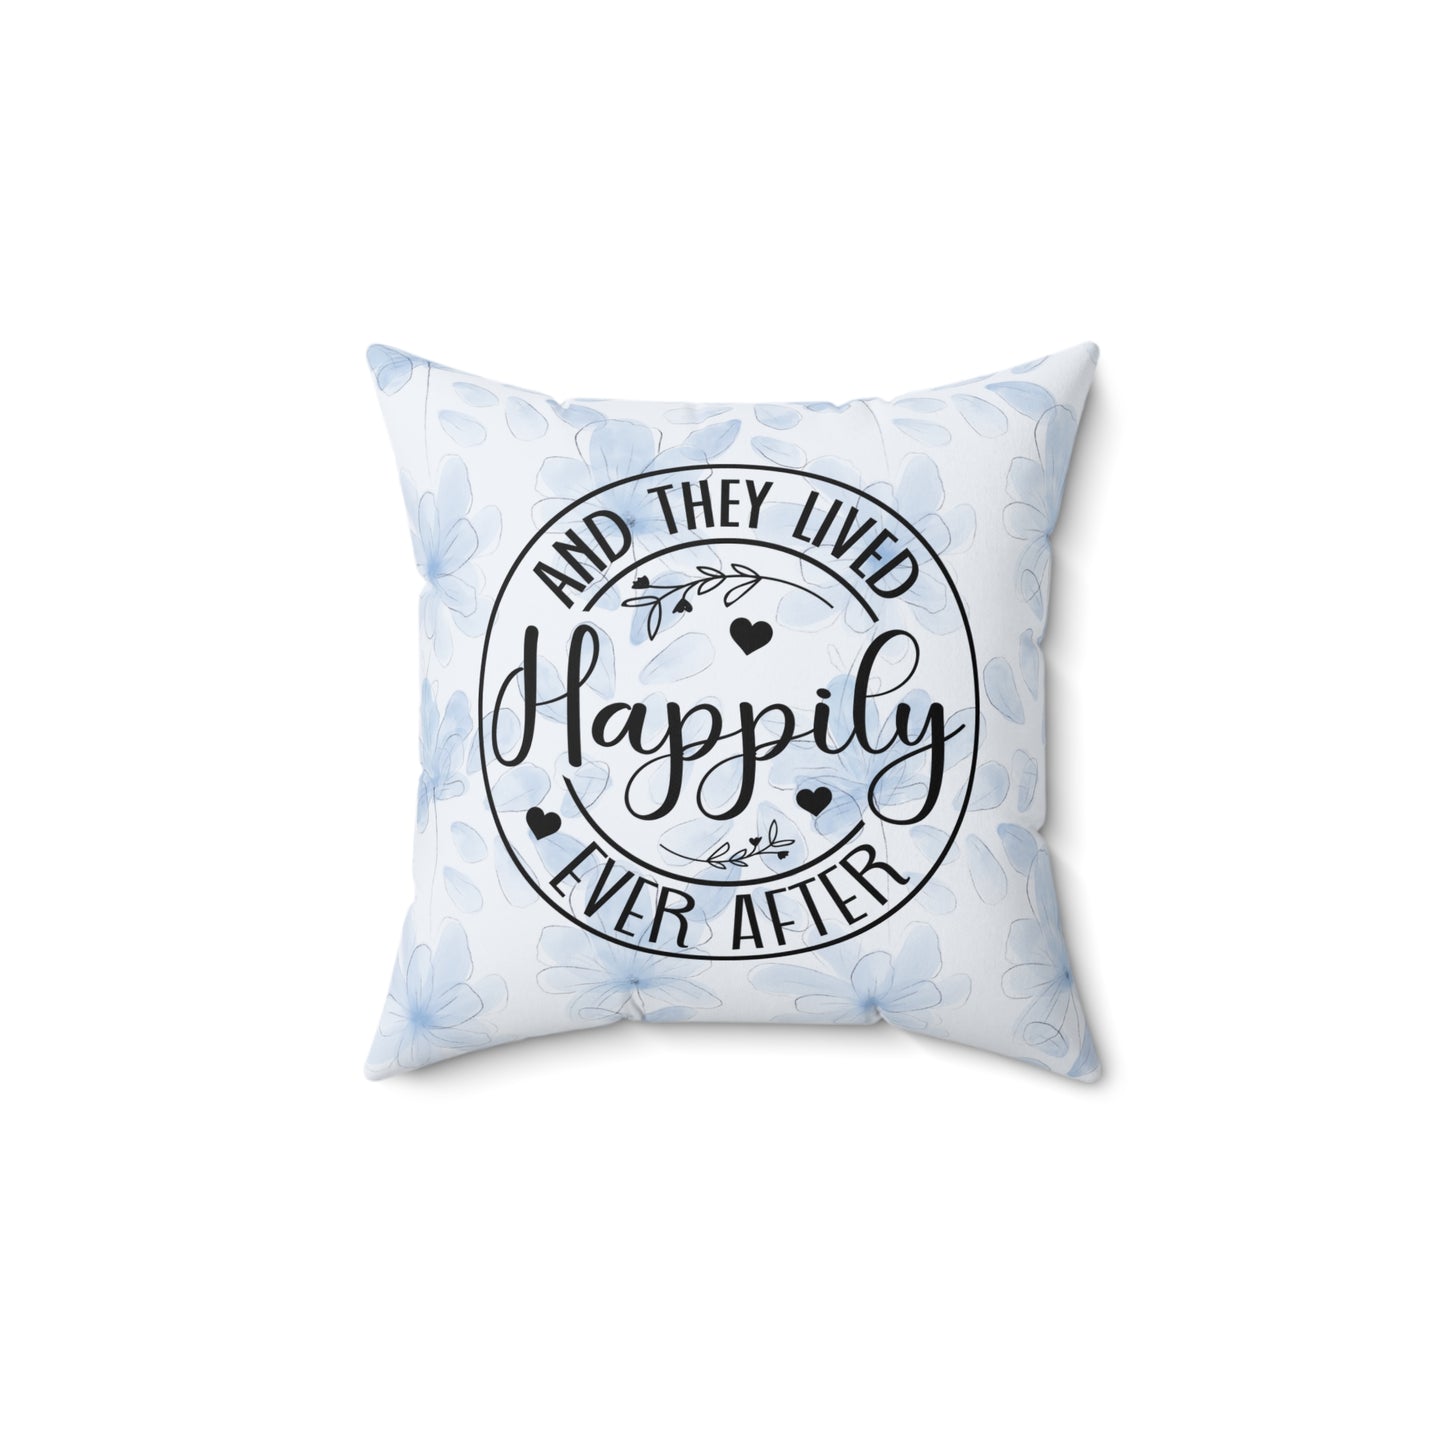 Happily Ever After | Square Pillow